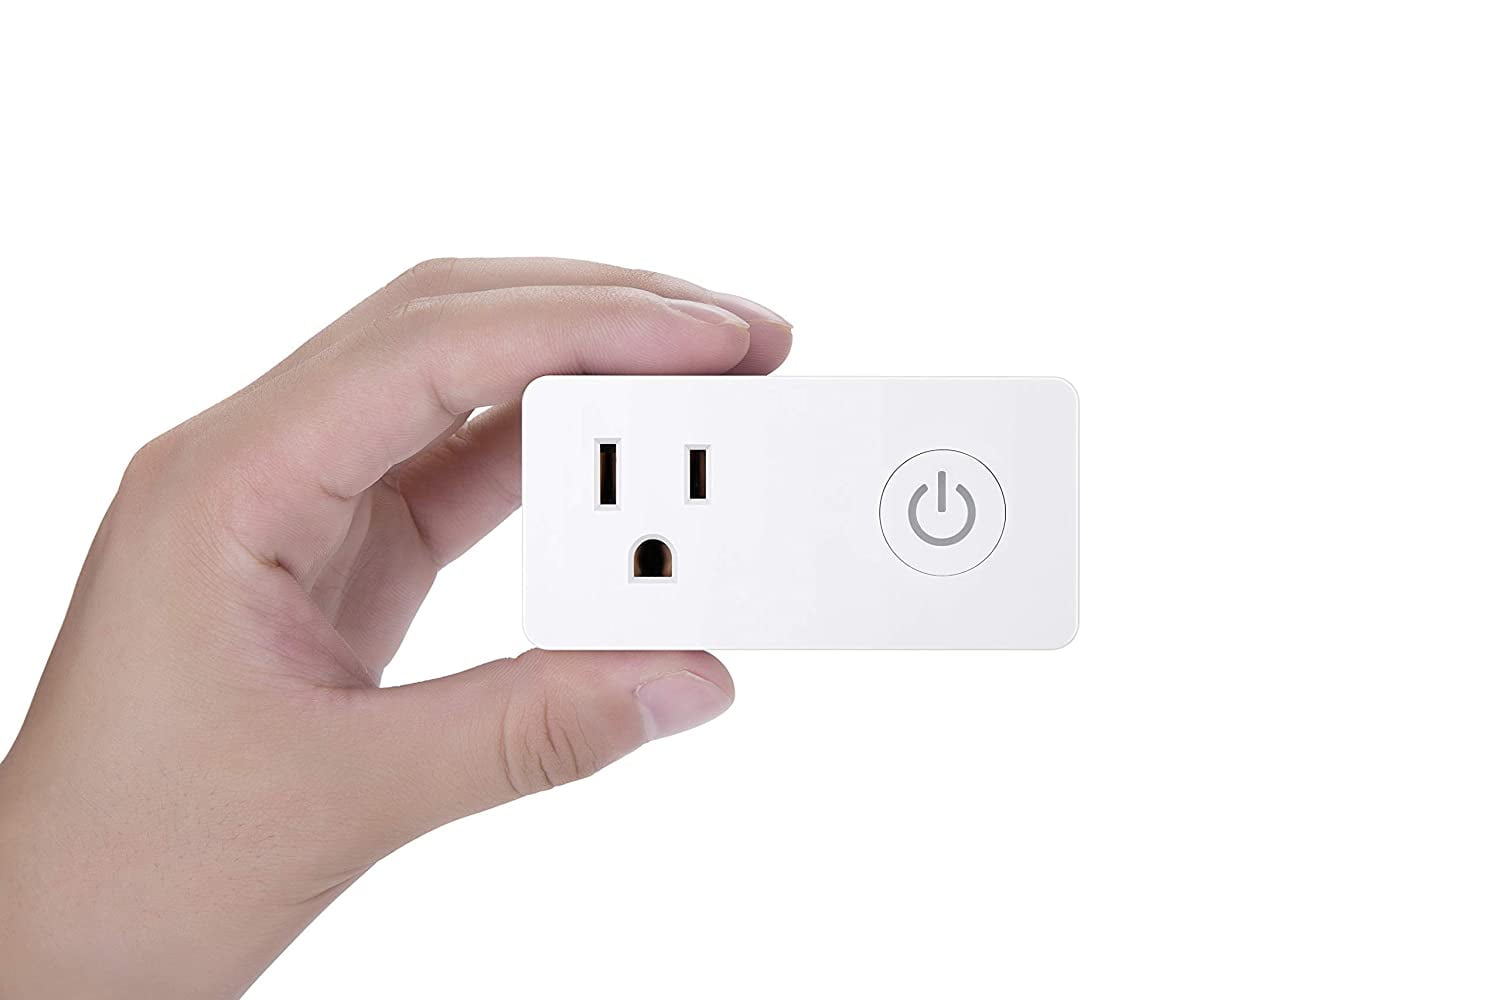  BN-LINK WiFi Heavy Duty Smart Plug Outlet, No Hub Required with  Timer Function, White, Compatible with Alexa and Google Assistant, 2.4 Ghz  Network Only (2 Pack) : Tools & Home Improvement